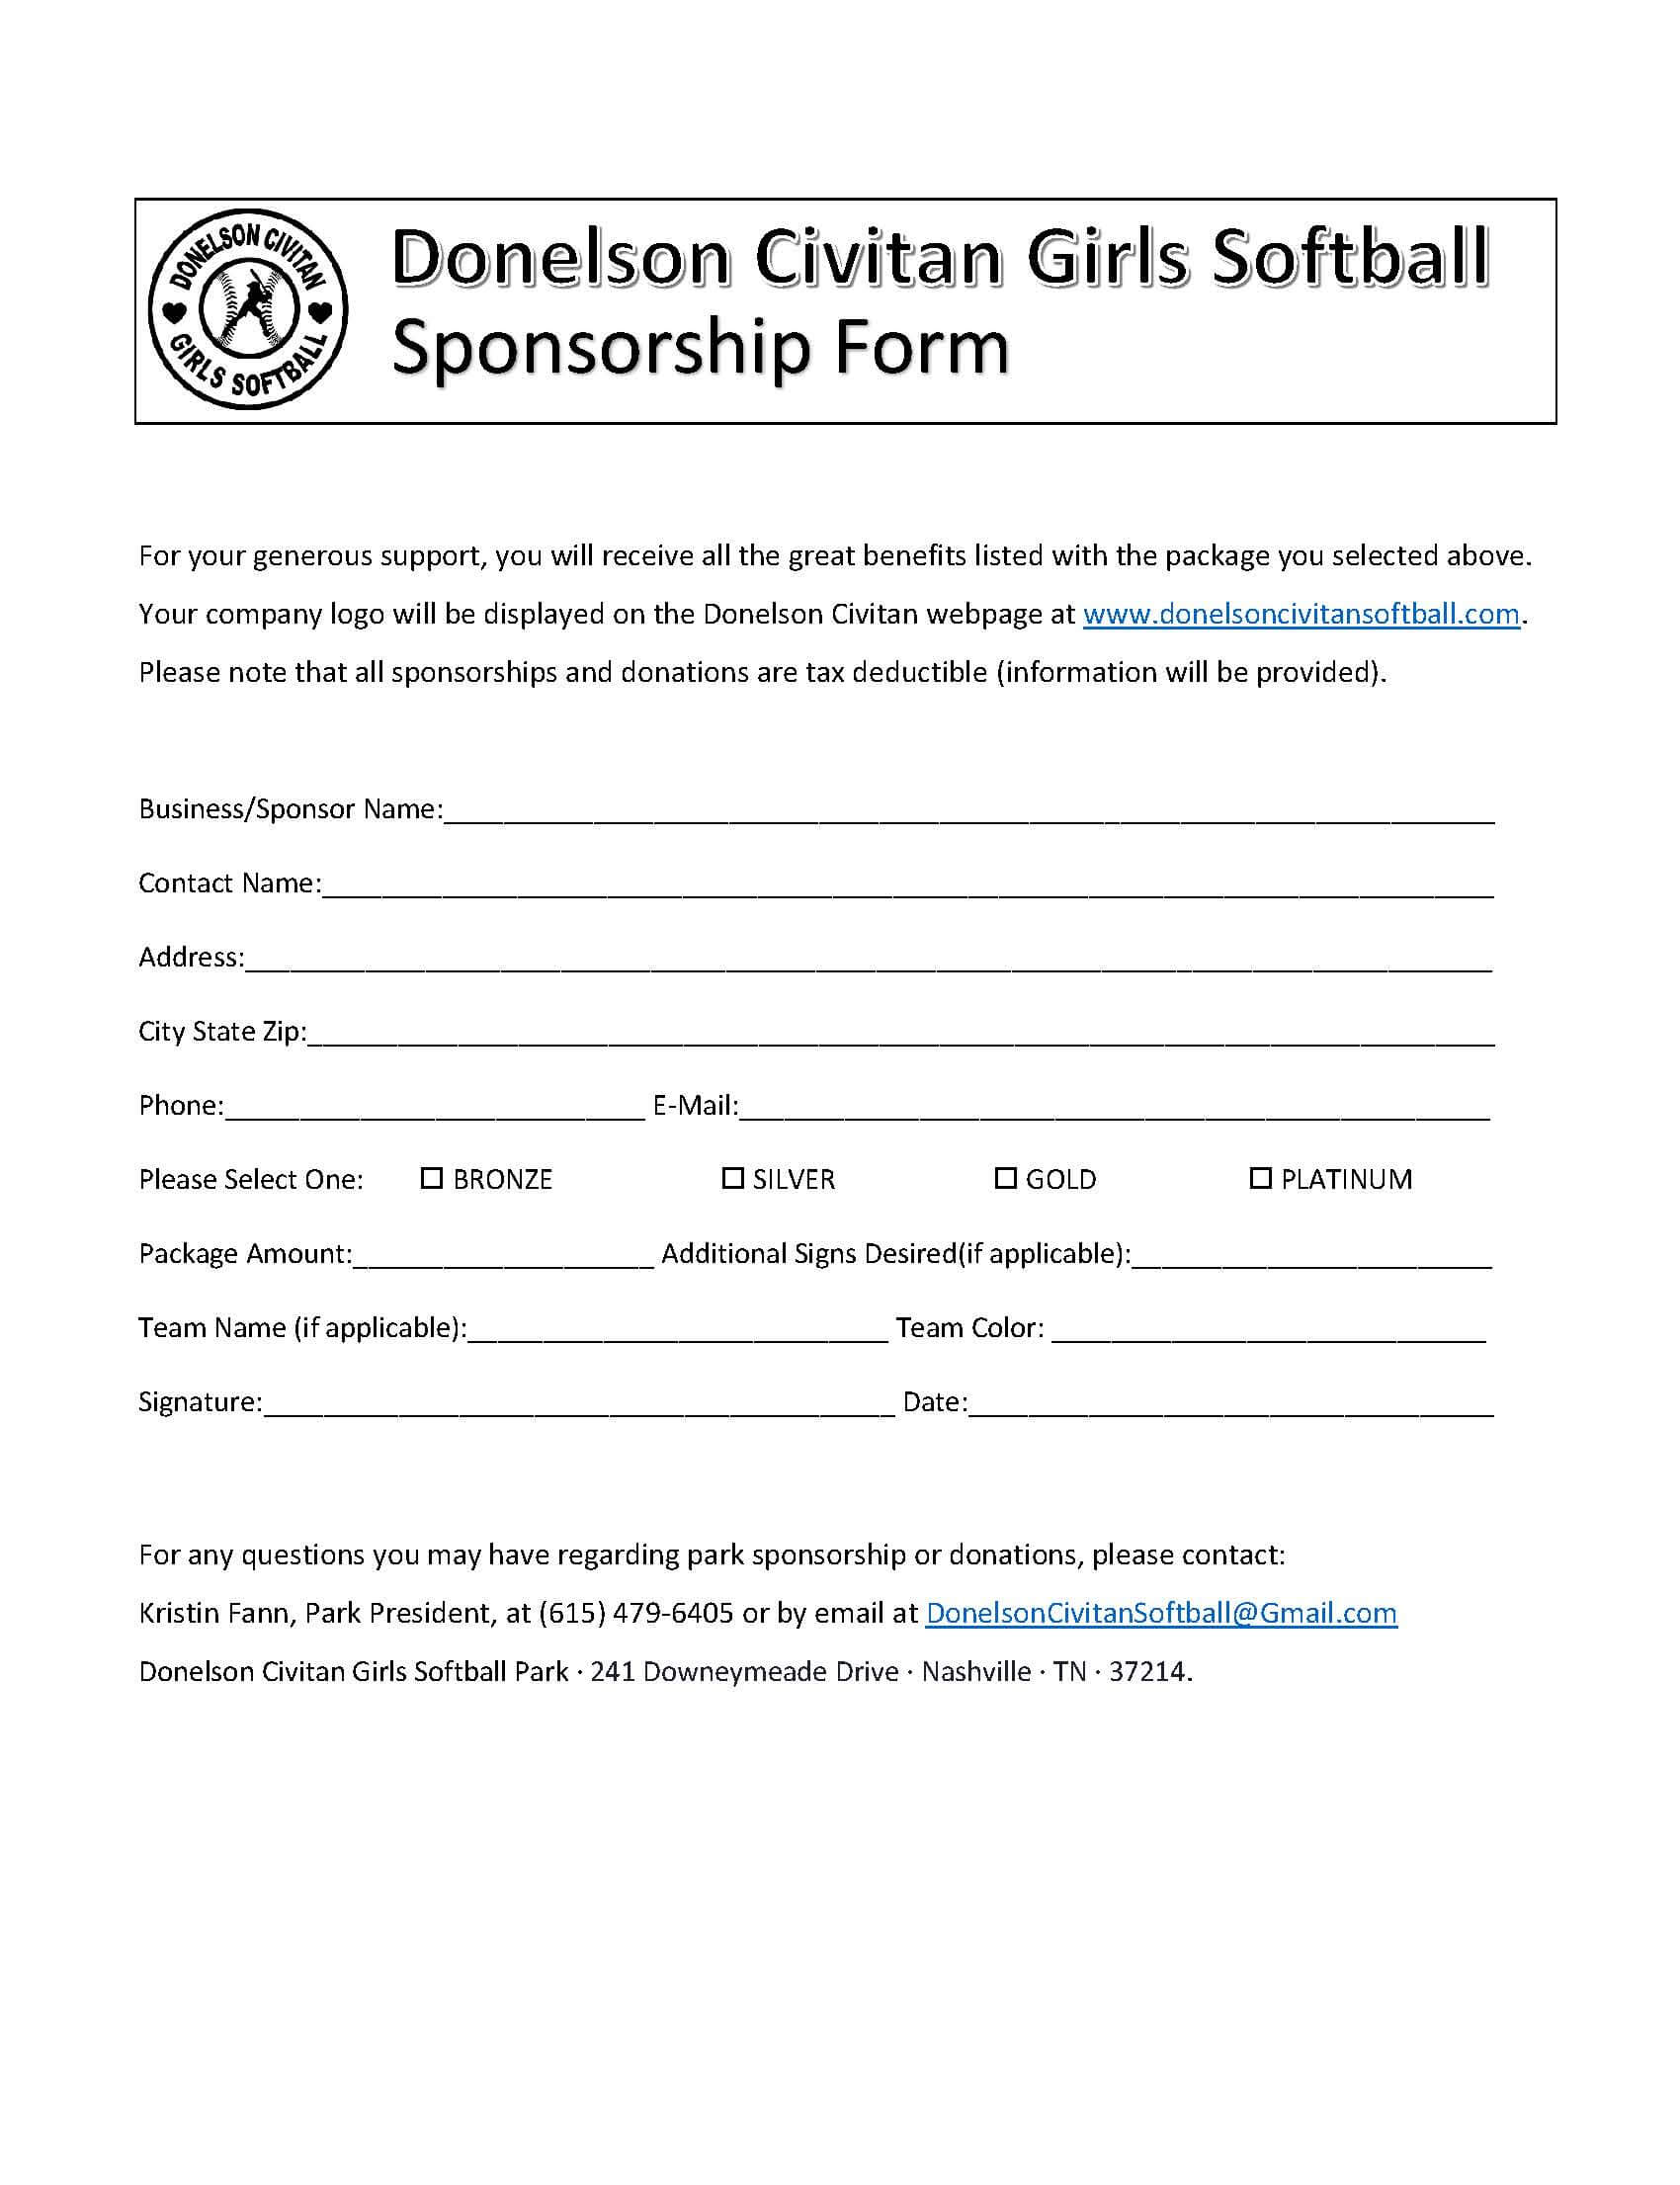 Sponsor Forms Templates Free ] – Template Sponsorship Form With Regard To Blank Sponsorship Form Template